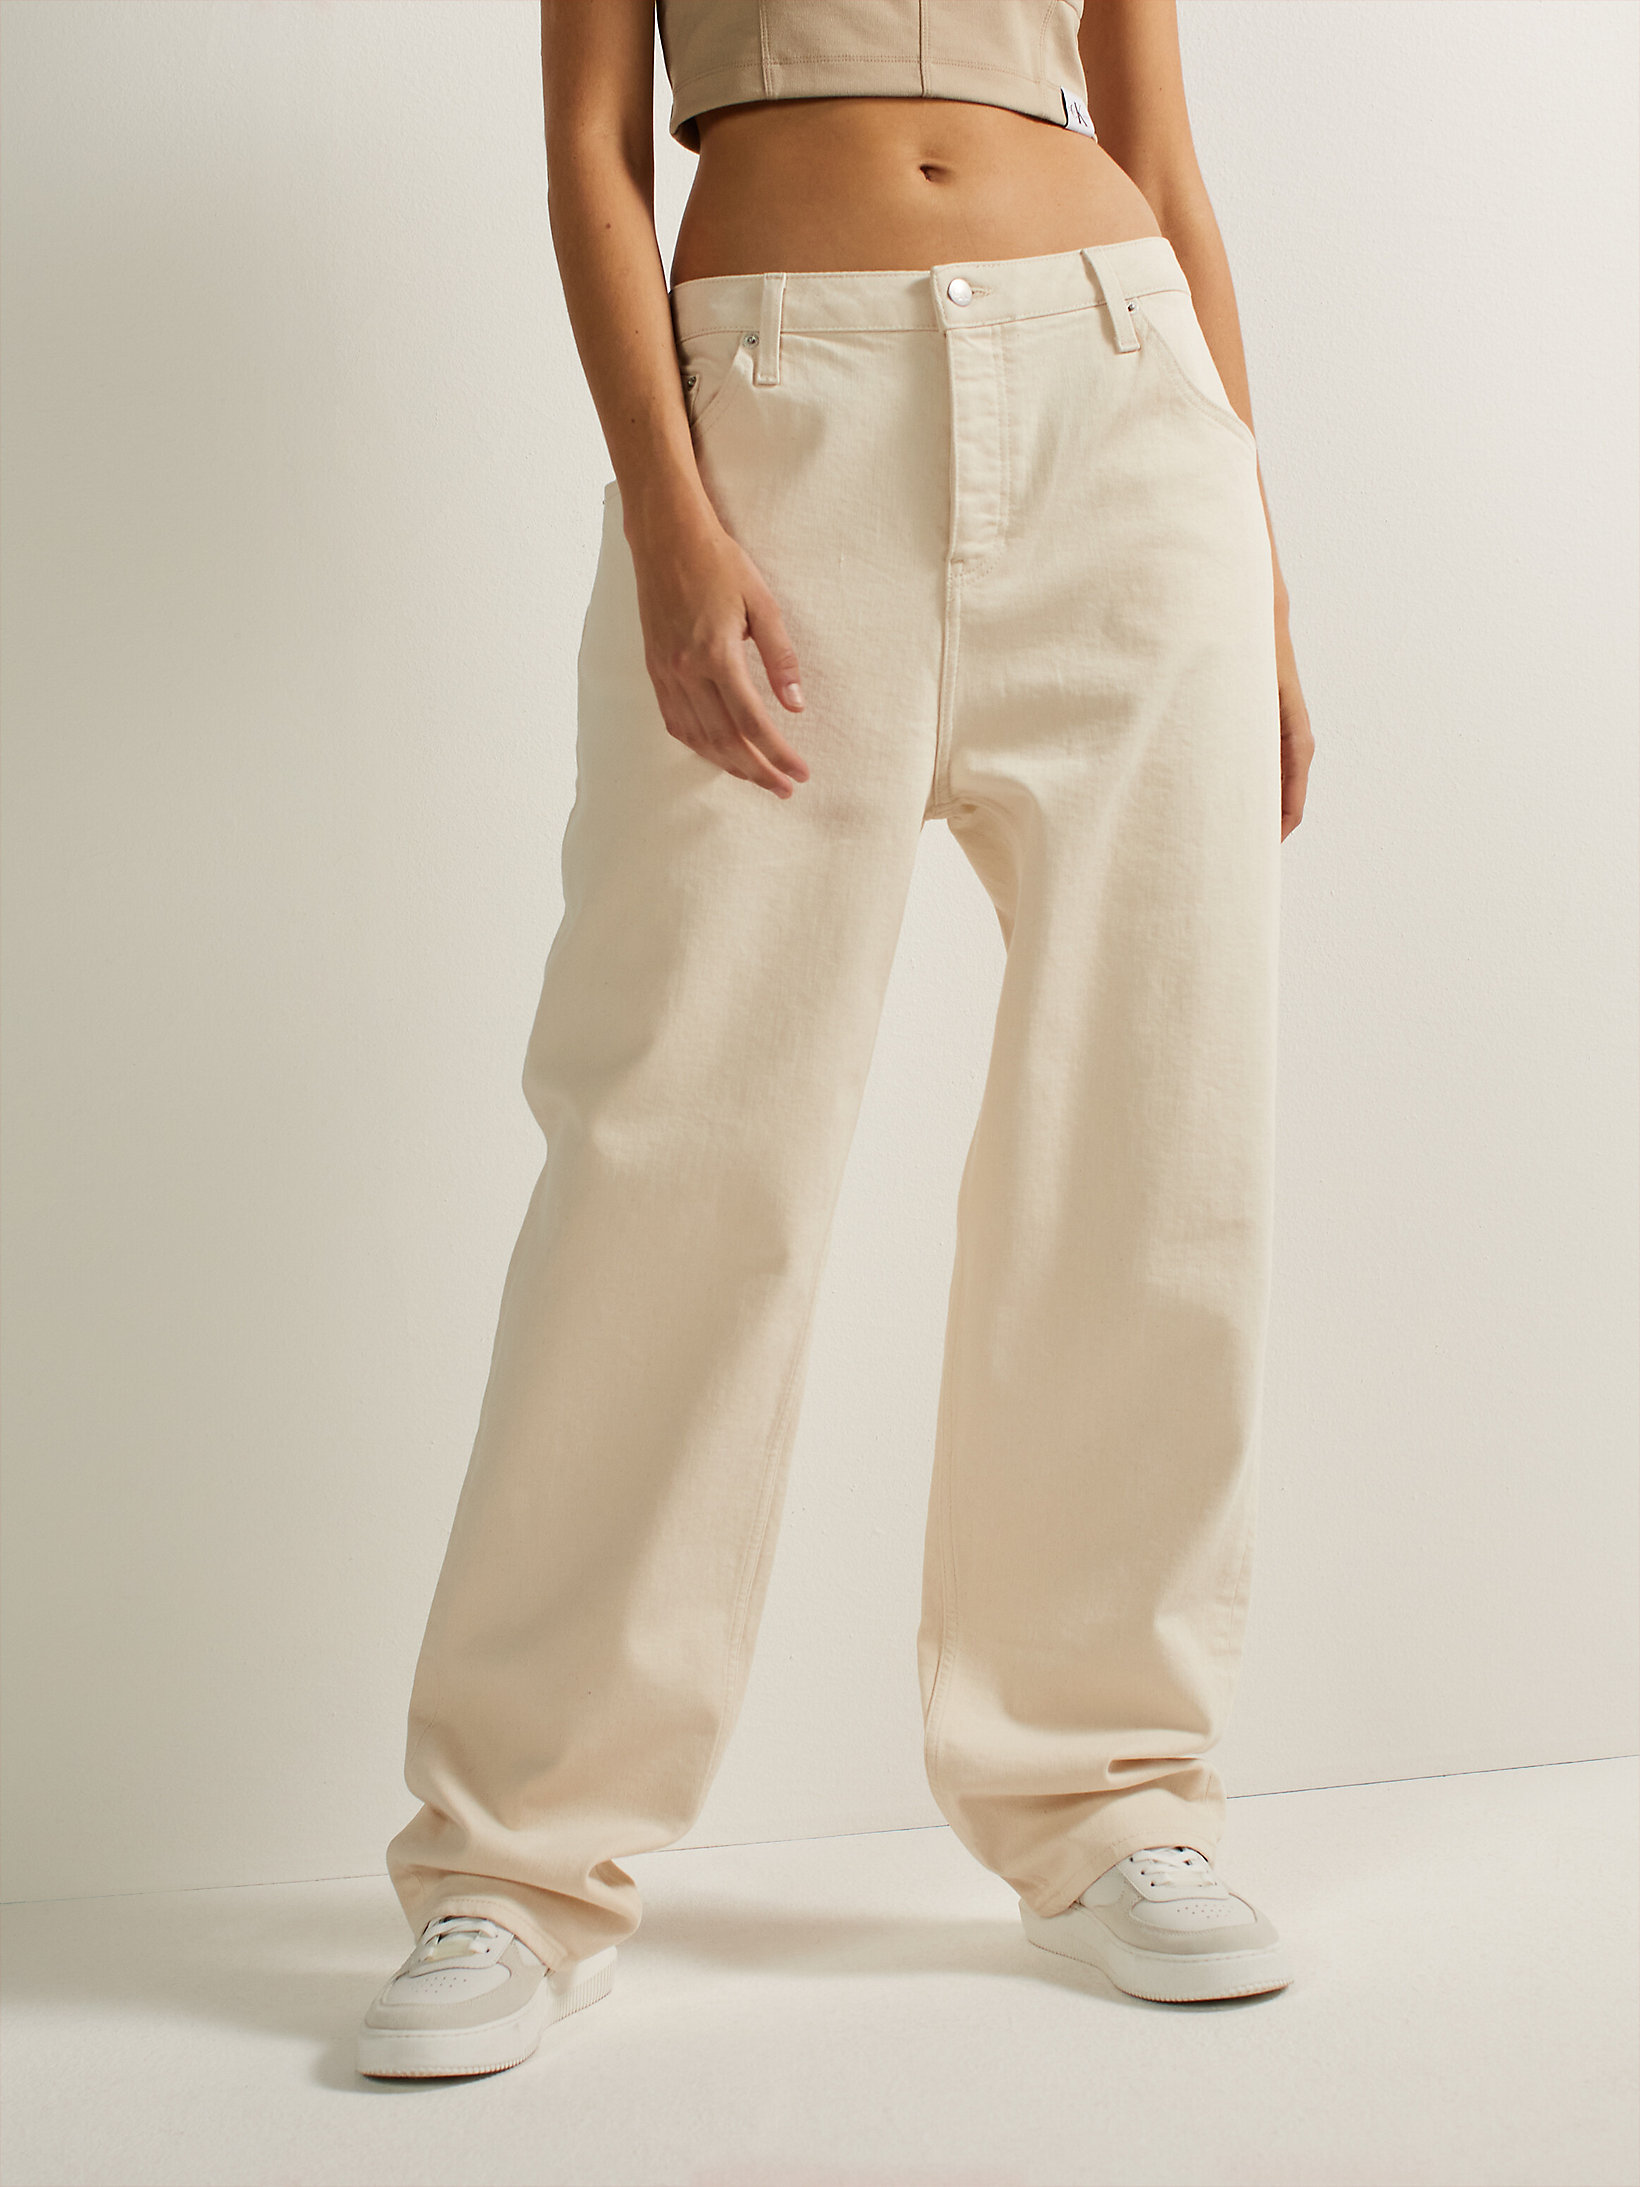 Crescent Moon High Rise Baggy Jeans undefined women Calvin Klein